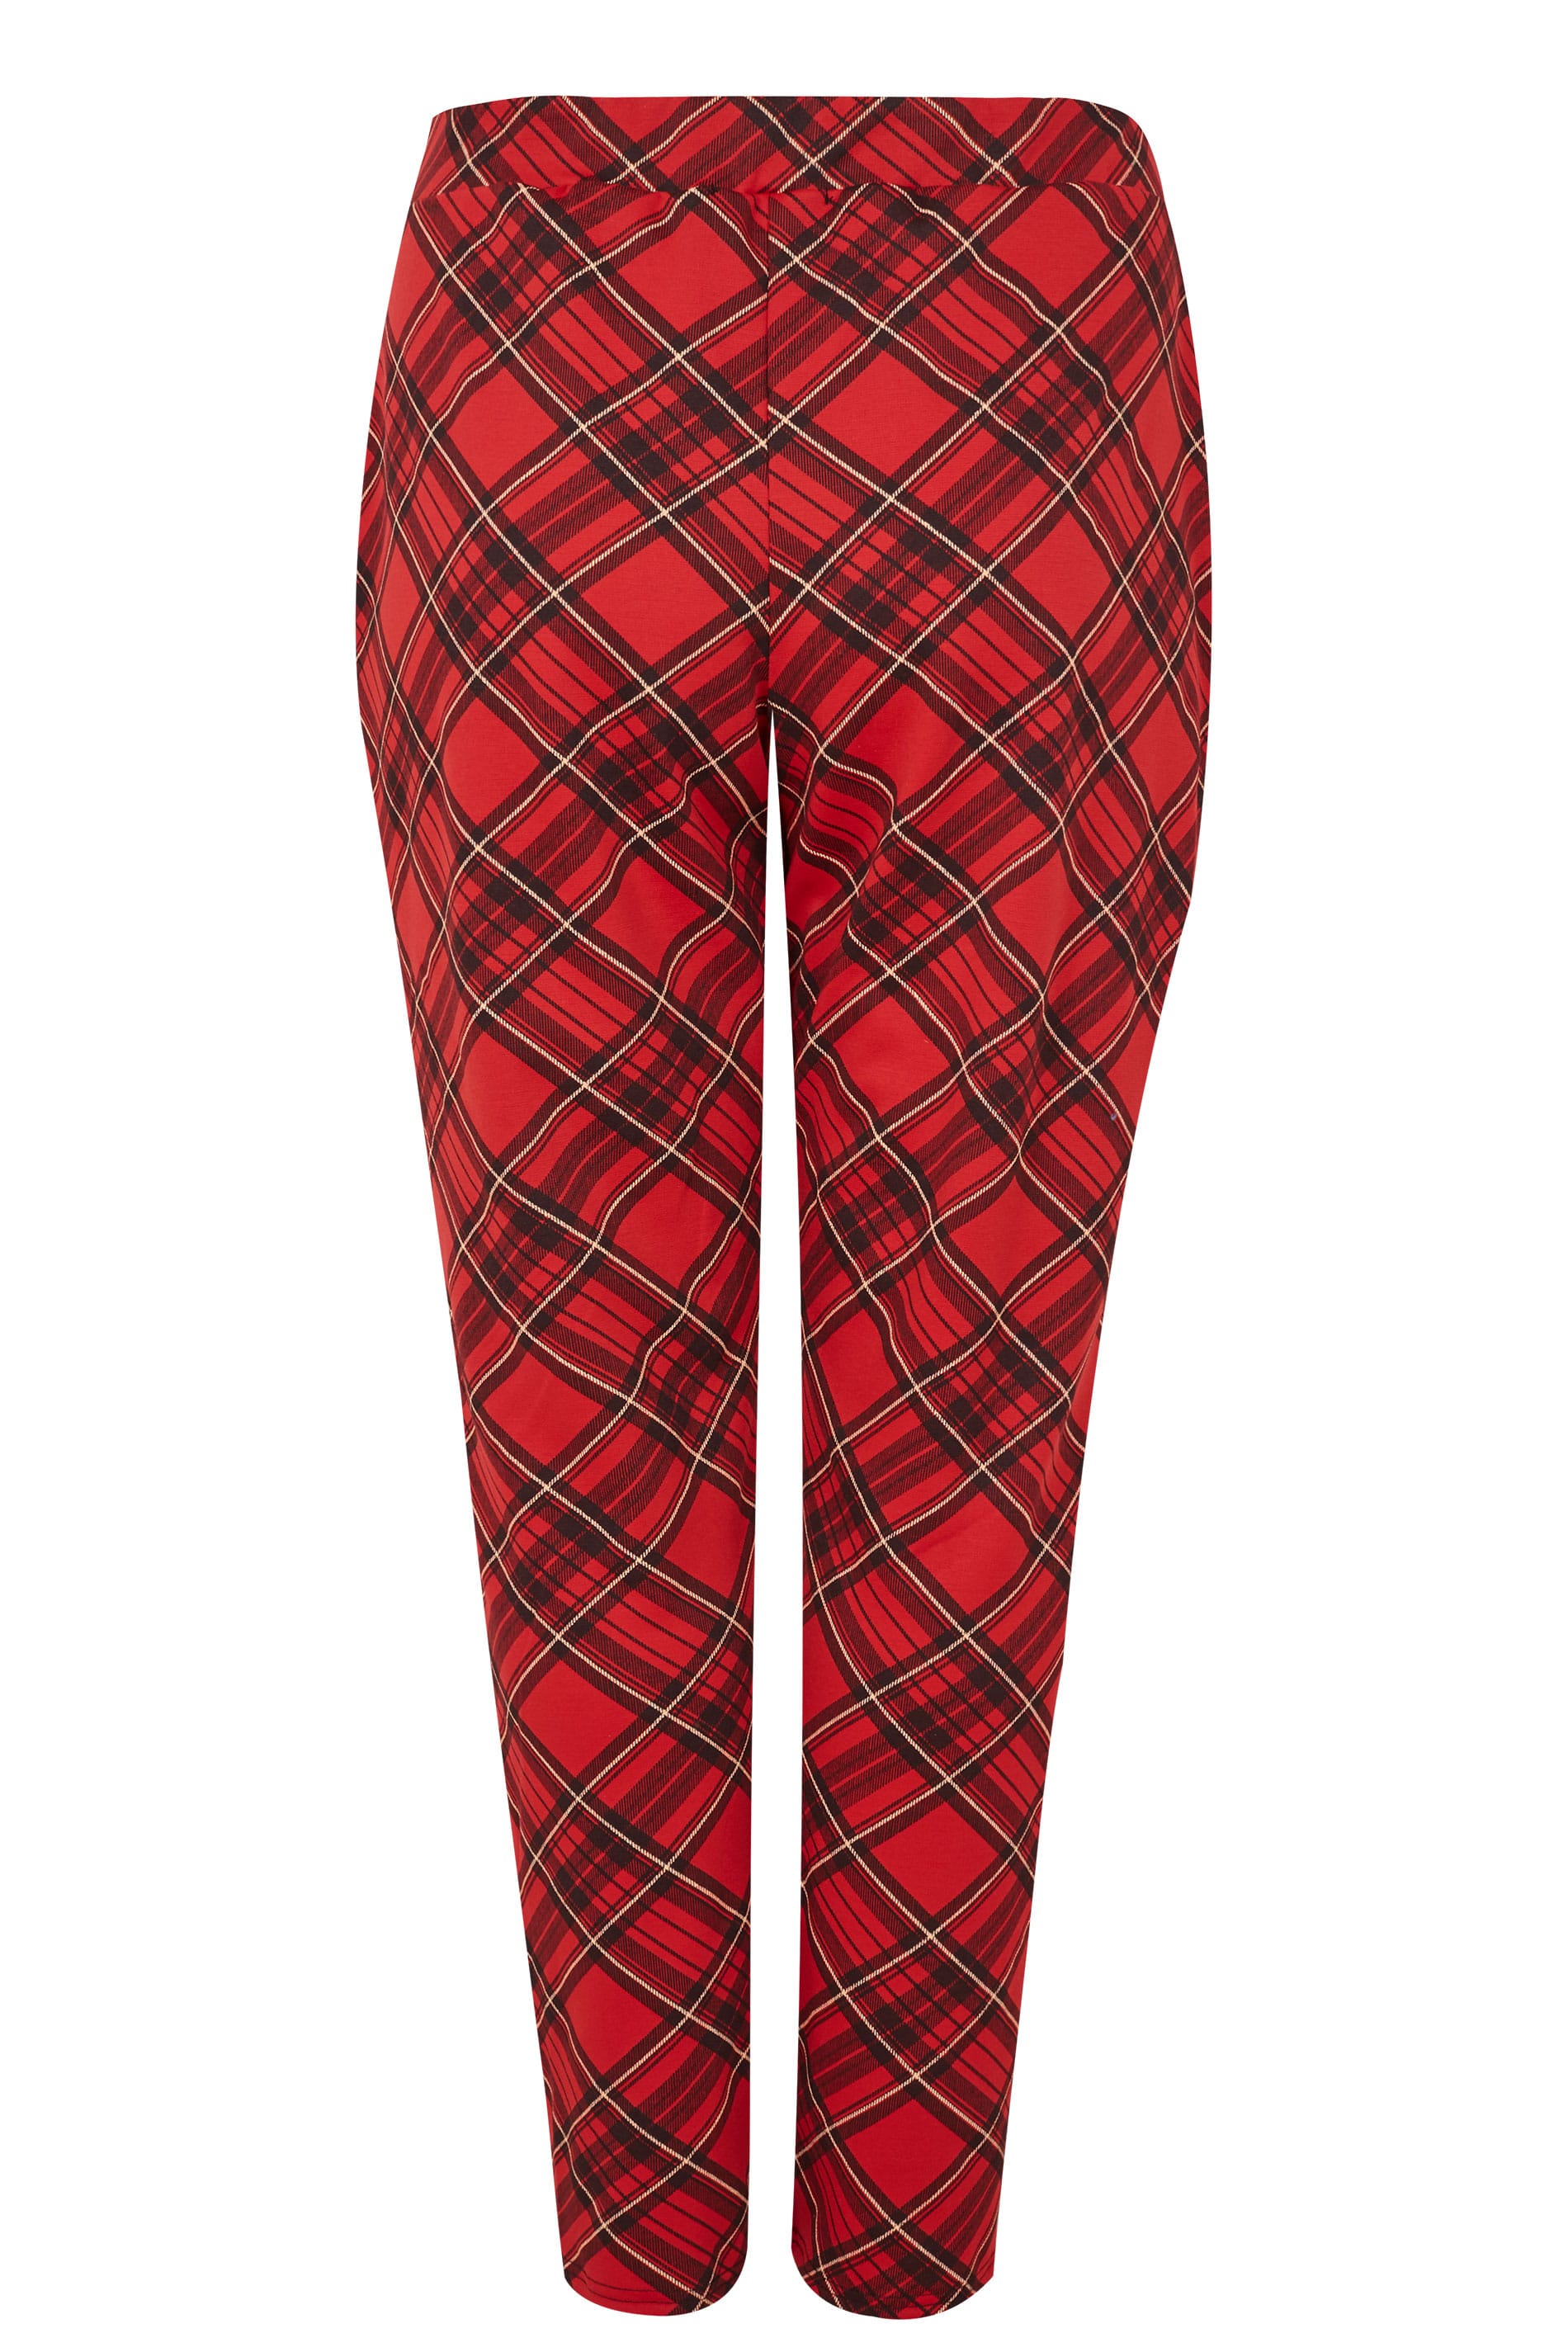 LIMITED COLLECTION Plus Size Red Tartan Trouser |Sizes 16 to 36 | Yours ...